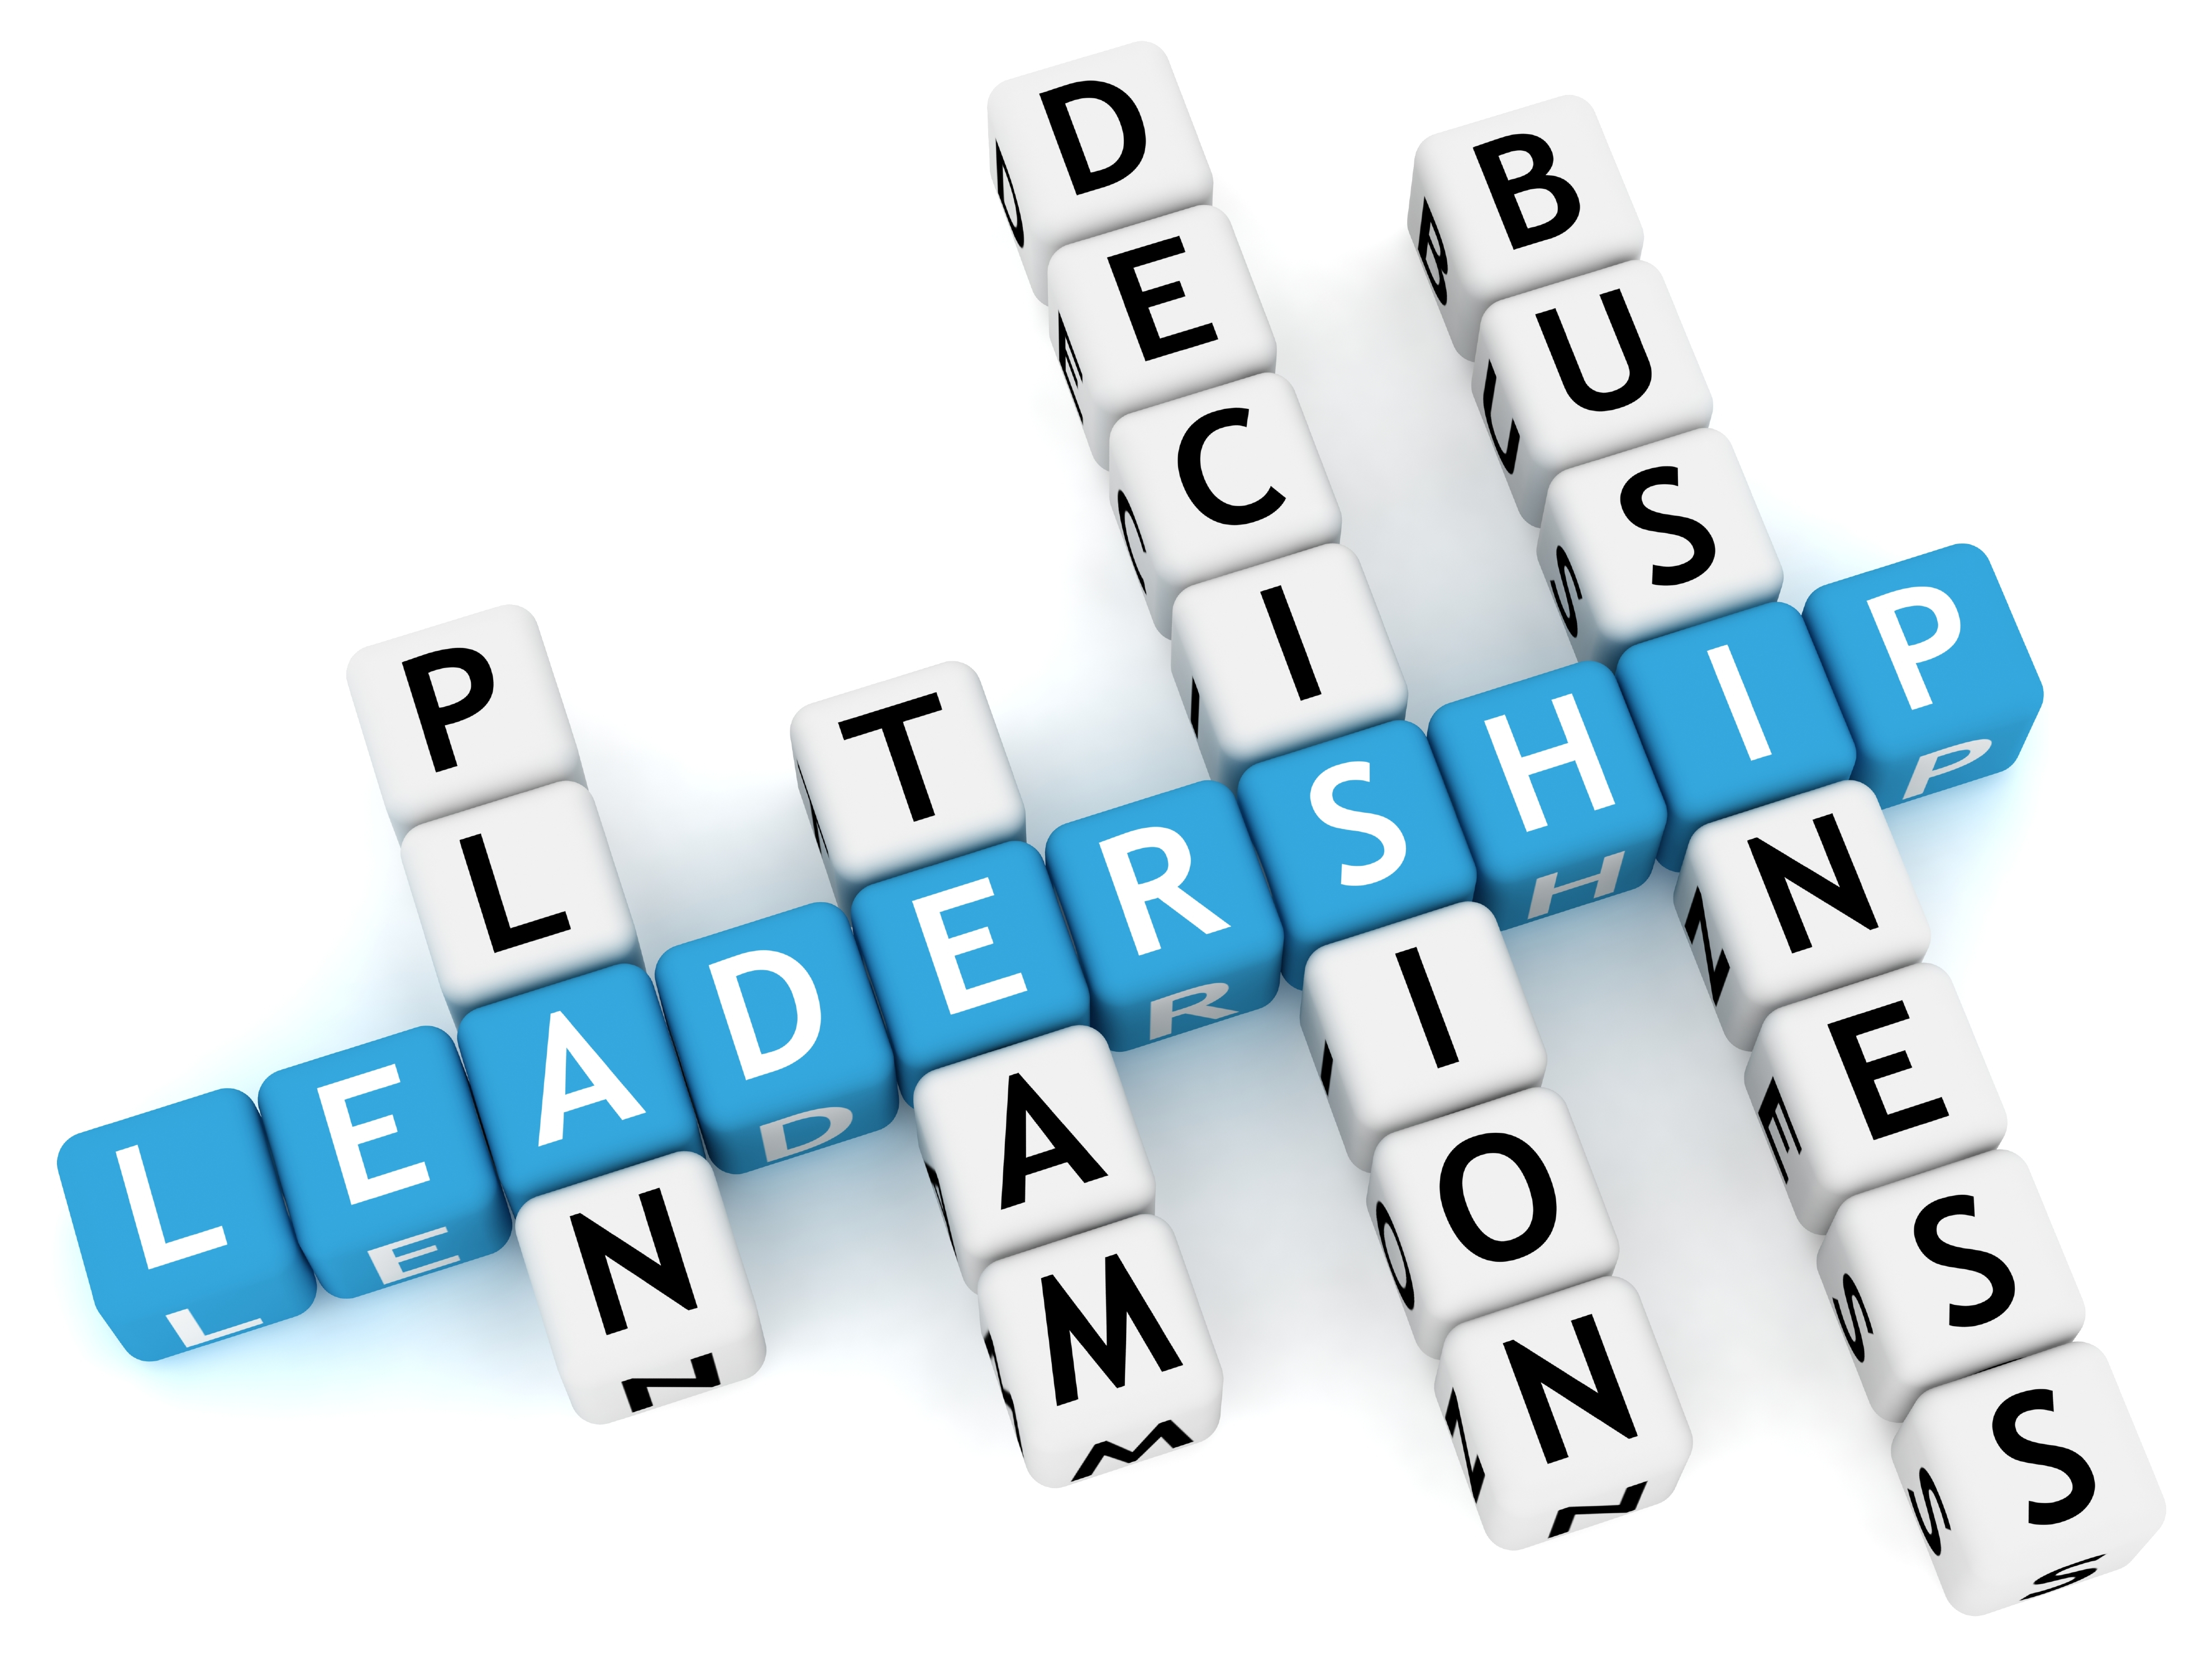 A strong leadership team is essential for your business' success